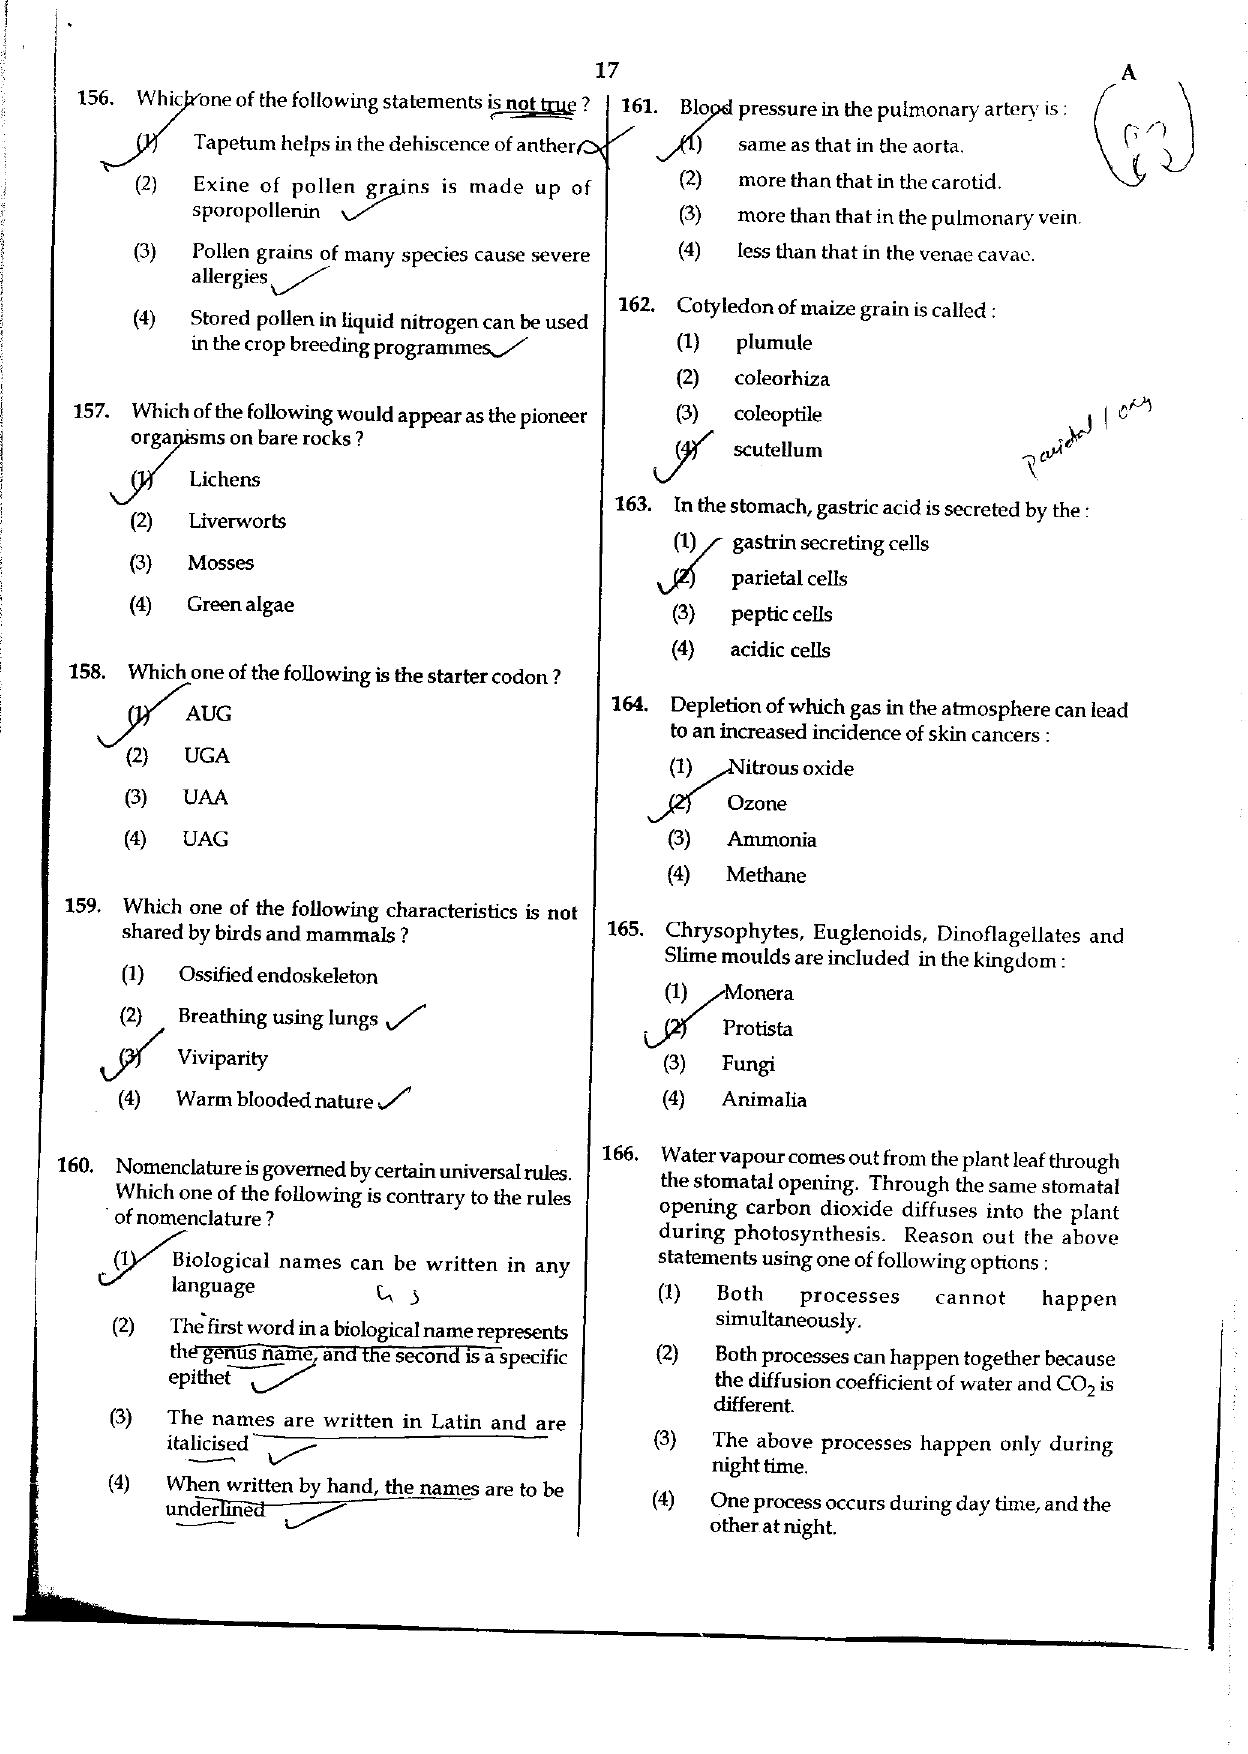 NEET Code A/ P/ W 2016 Question Paper - Page 17